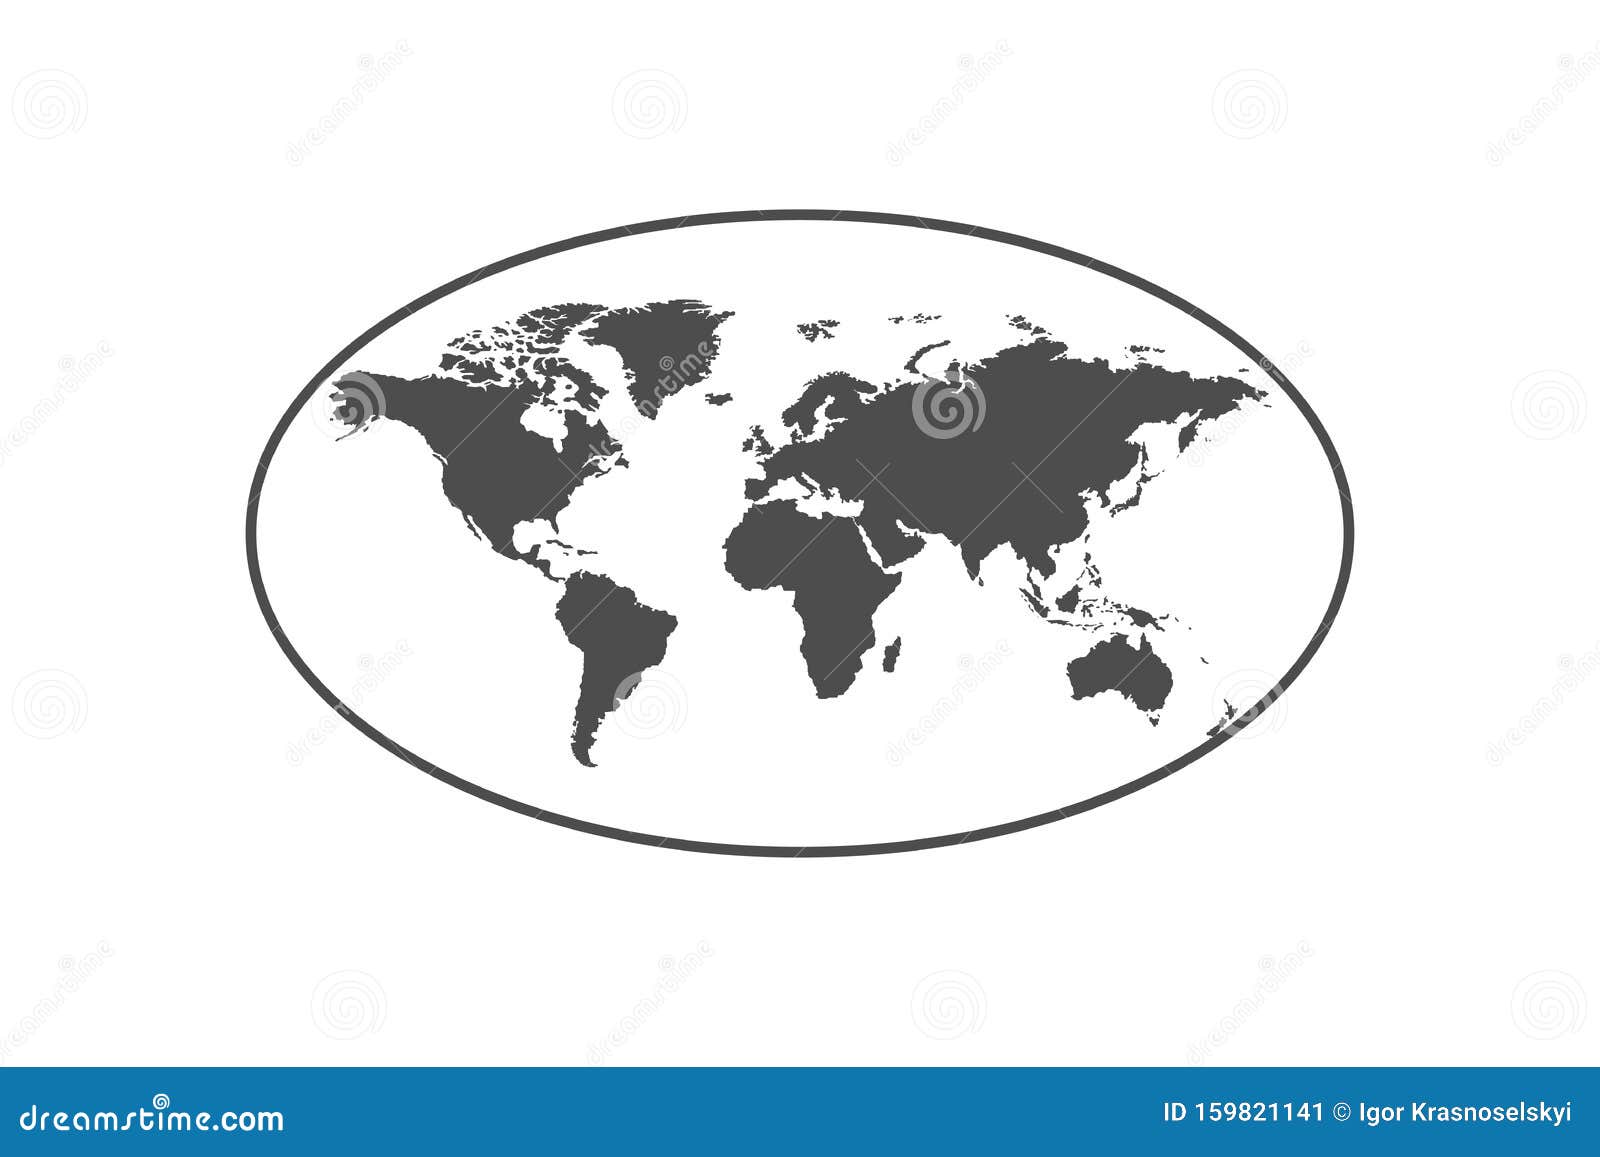 Earth Map Globe. Earth Map in Circle and Flat Design, Isolated on White ...